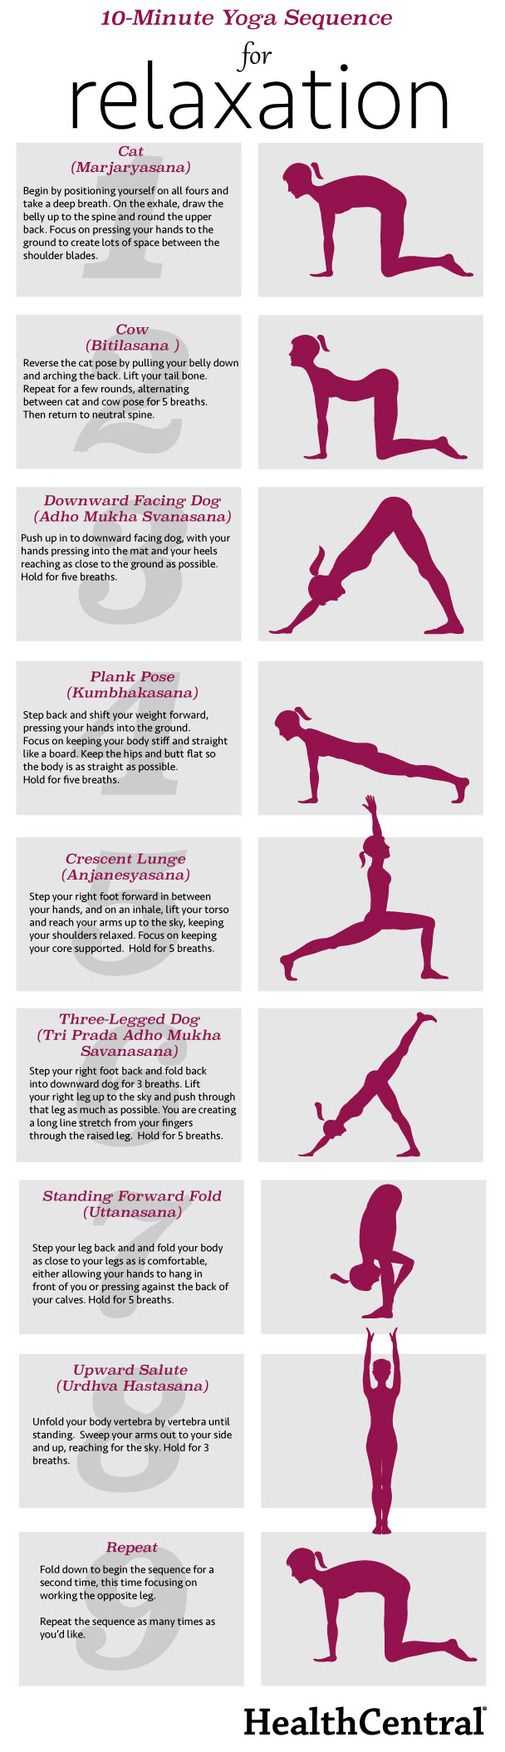 10-Minute Yoga Sequence